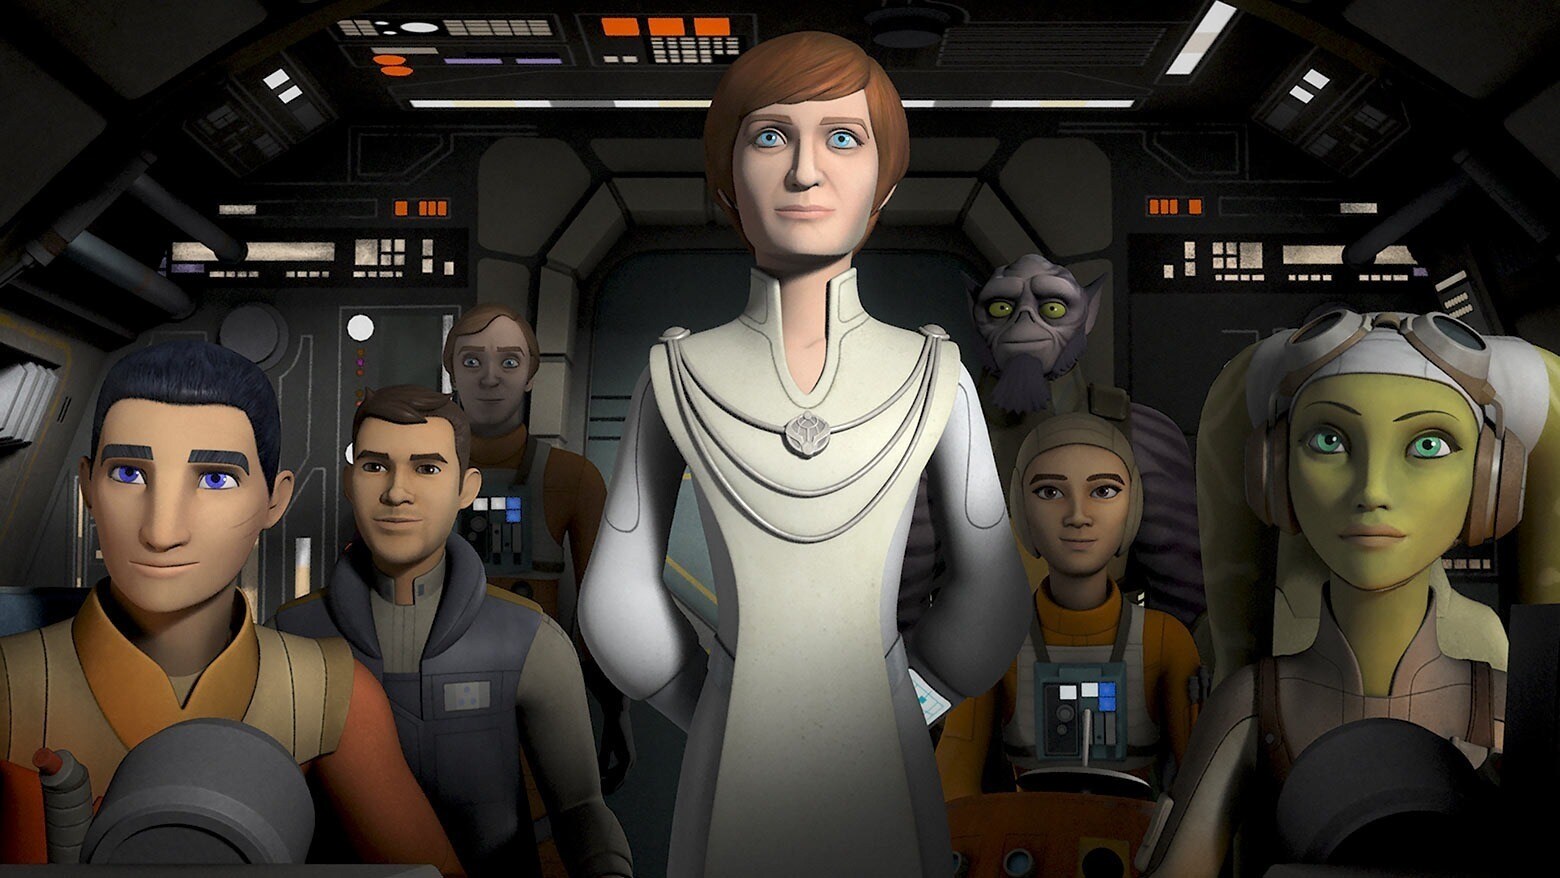 Mon Mothma with Ezra, Hera and more rebels on the Ghost